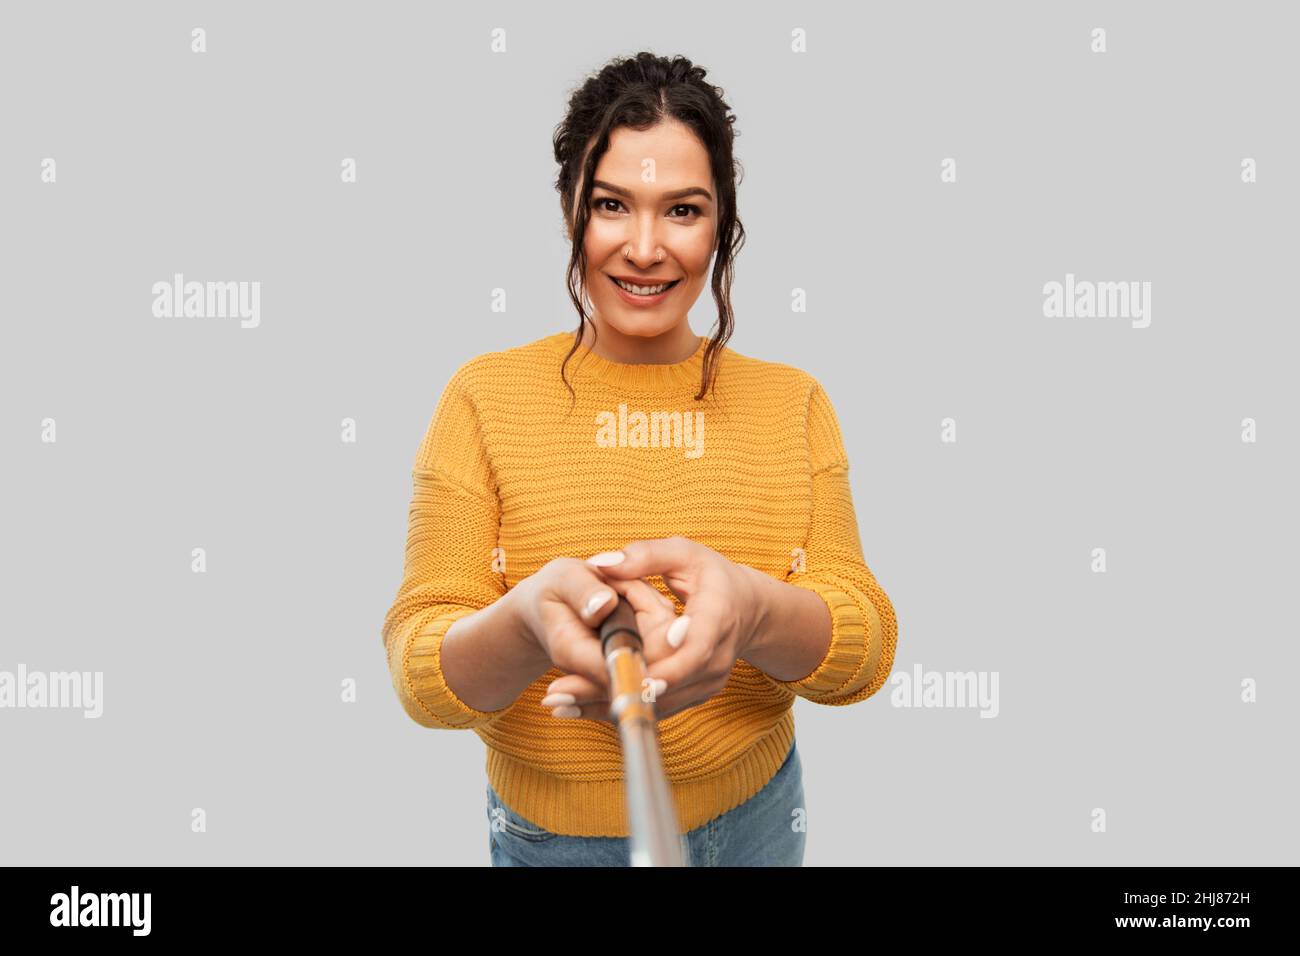 smiling woman taking picture with selfie stick Stock Photo